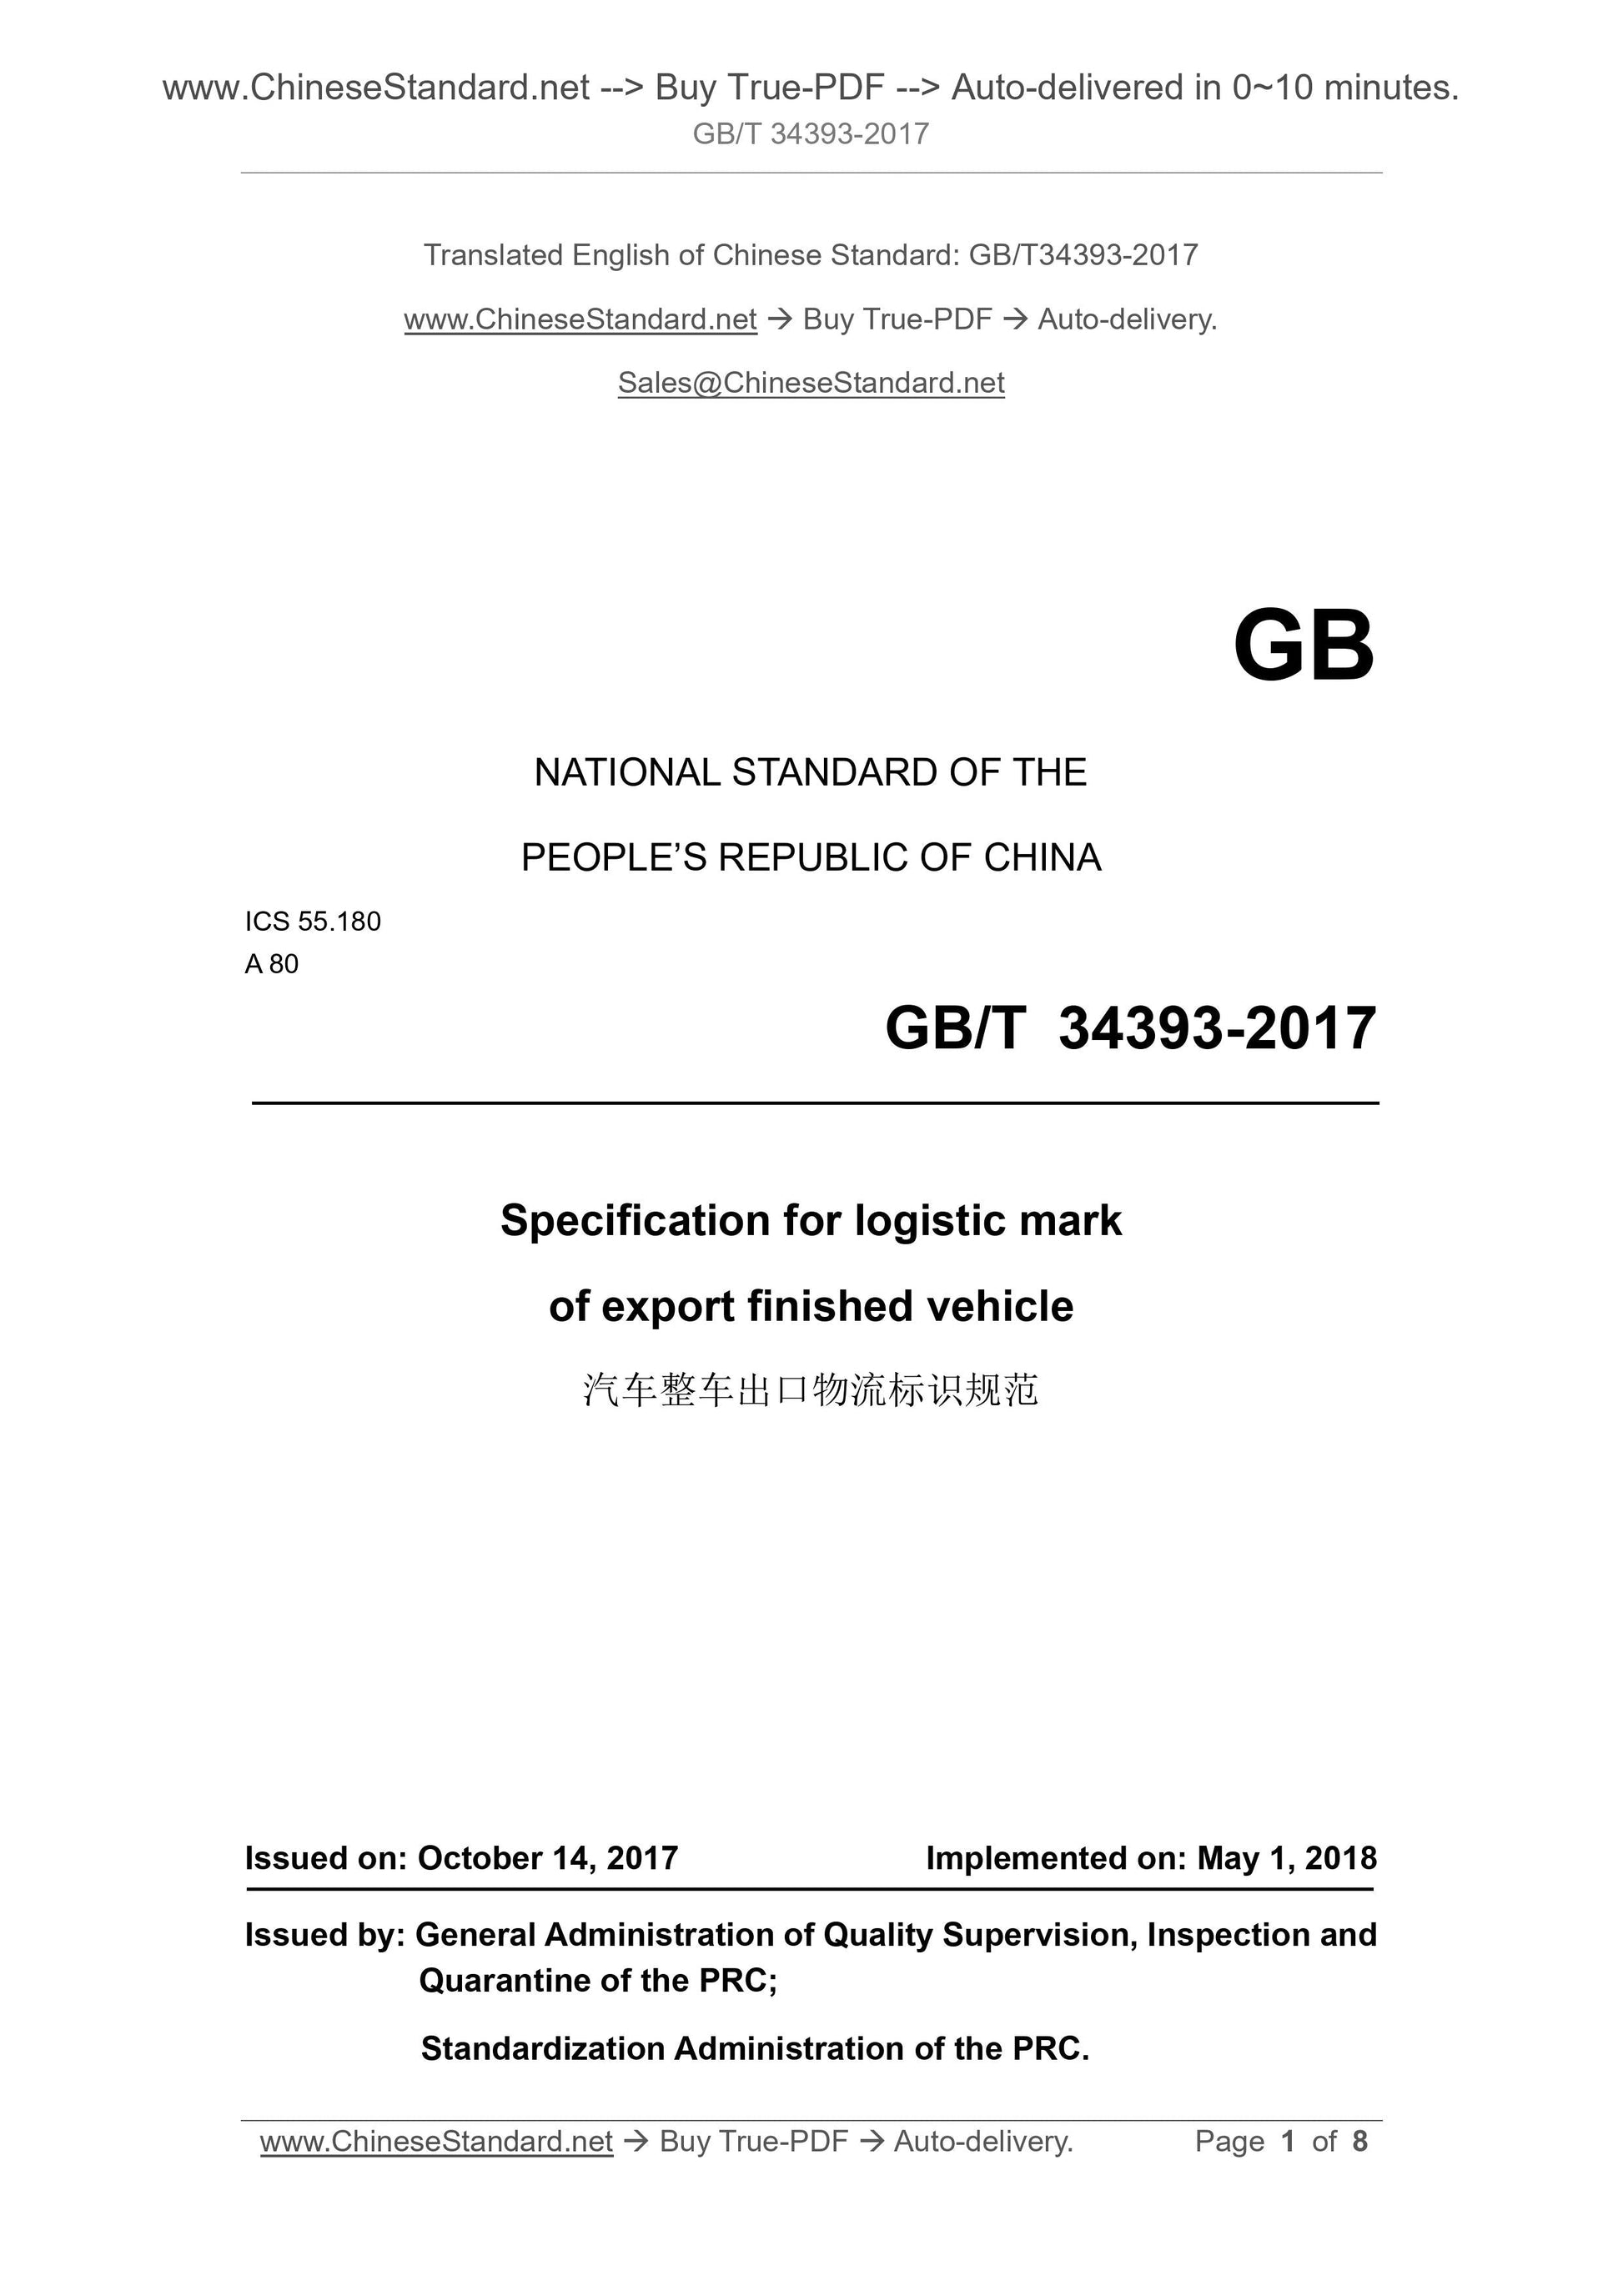 GB/T 34393-2017 Page 1